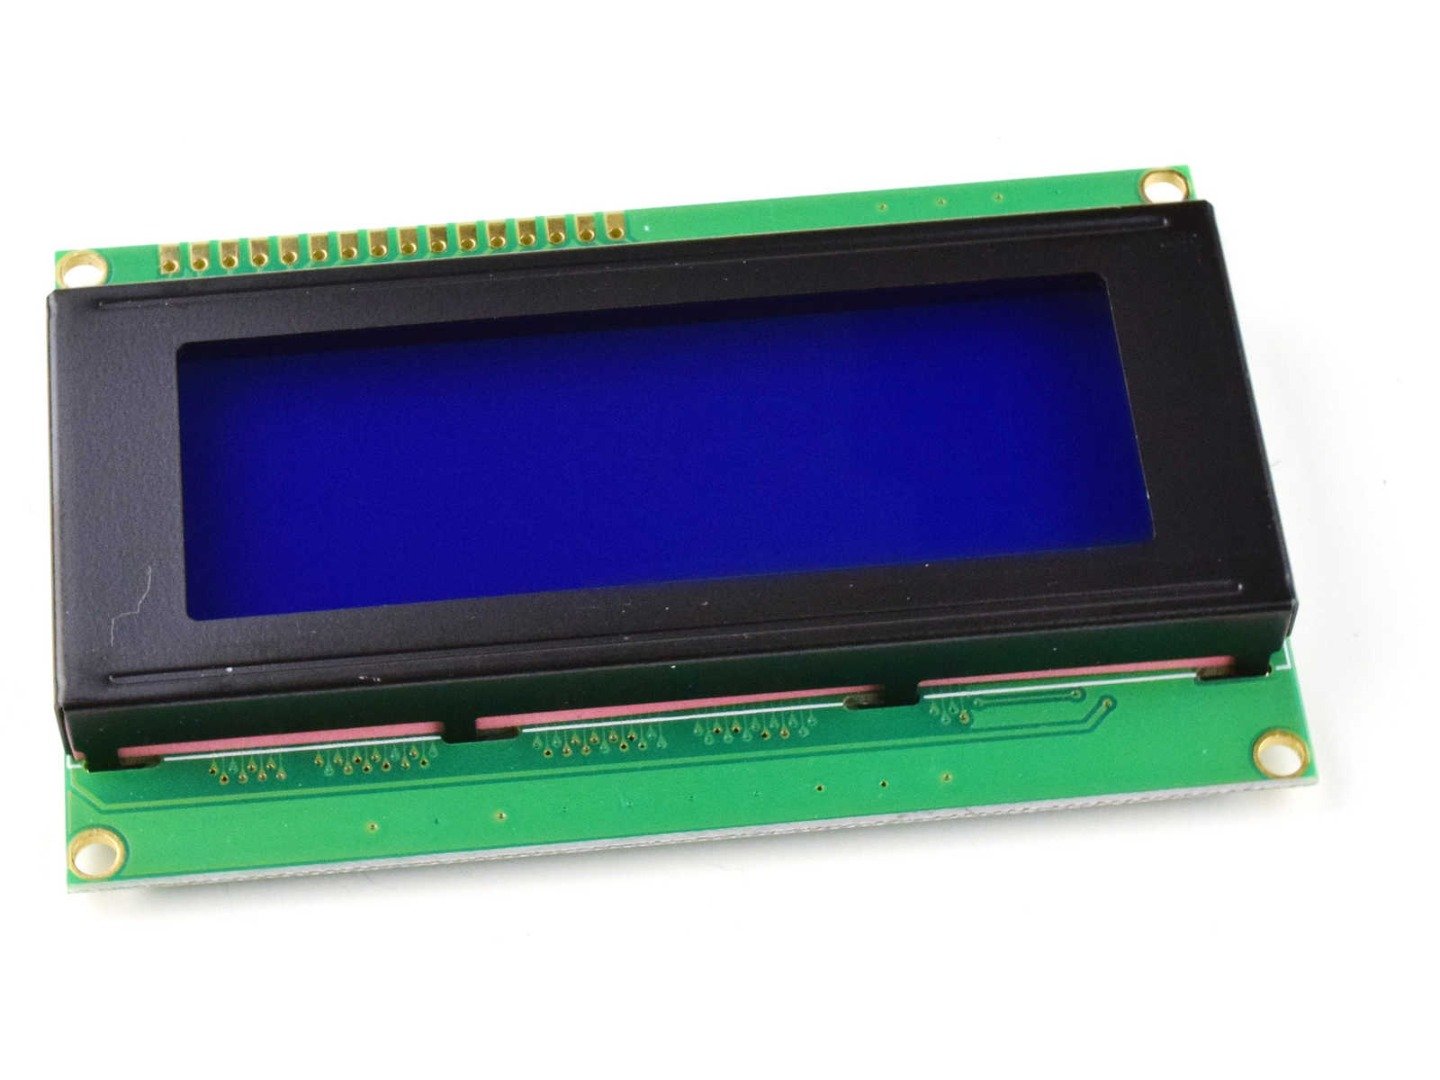 LCD 2004 20×4 Blue, White Backlight, parallel or I2C serial 6